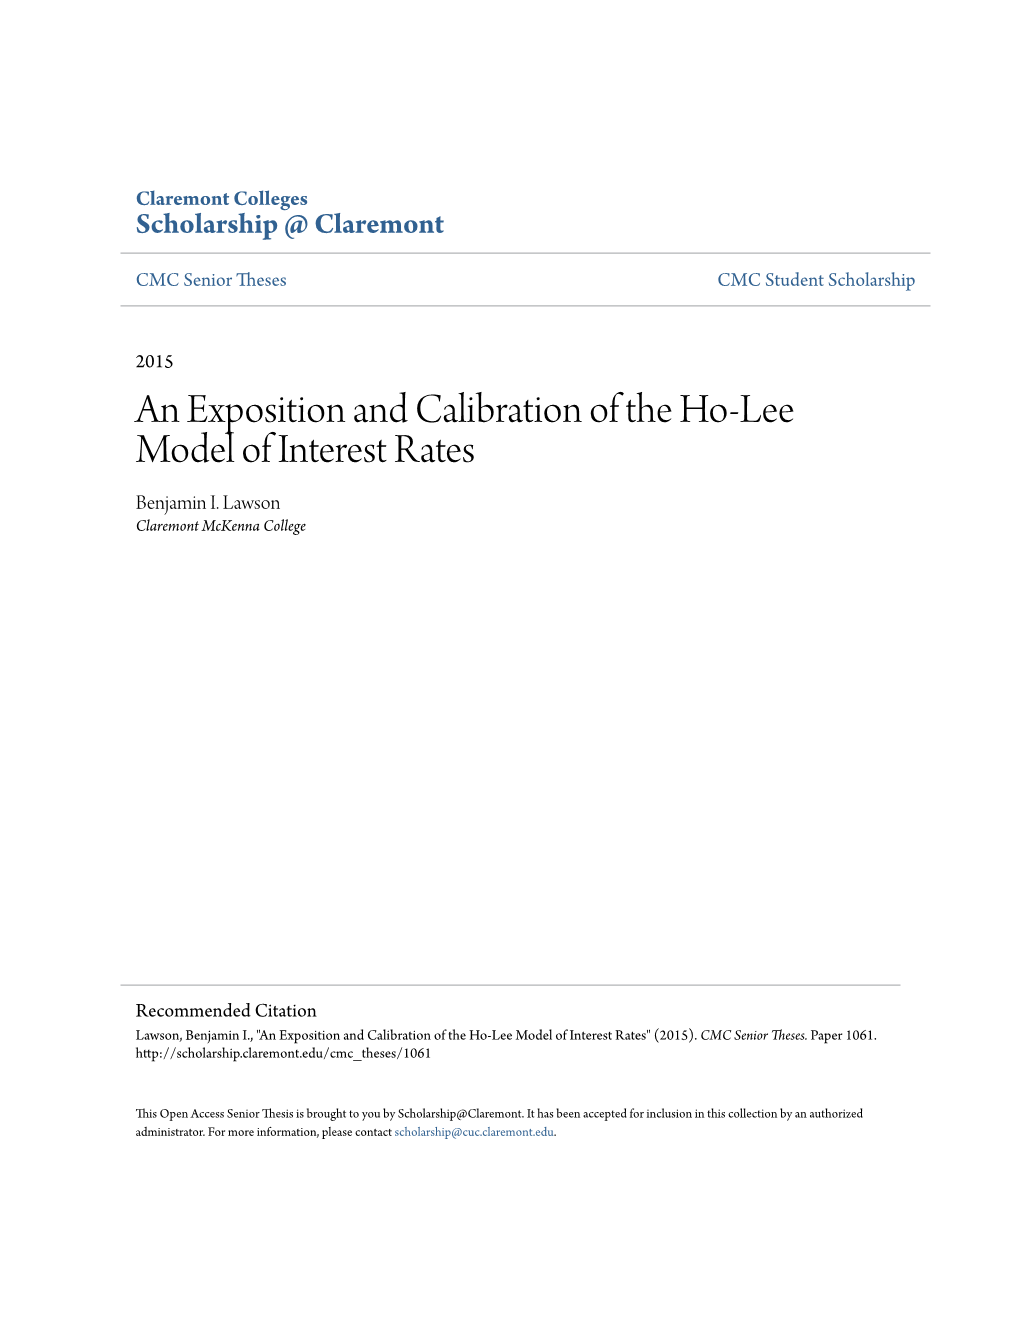 An Exposition and Calibration of the Ho-Lee Model of Interest Rates Benjamin I